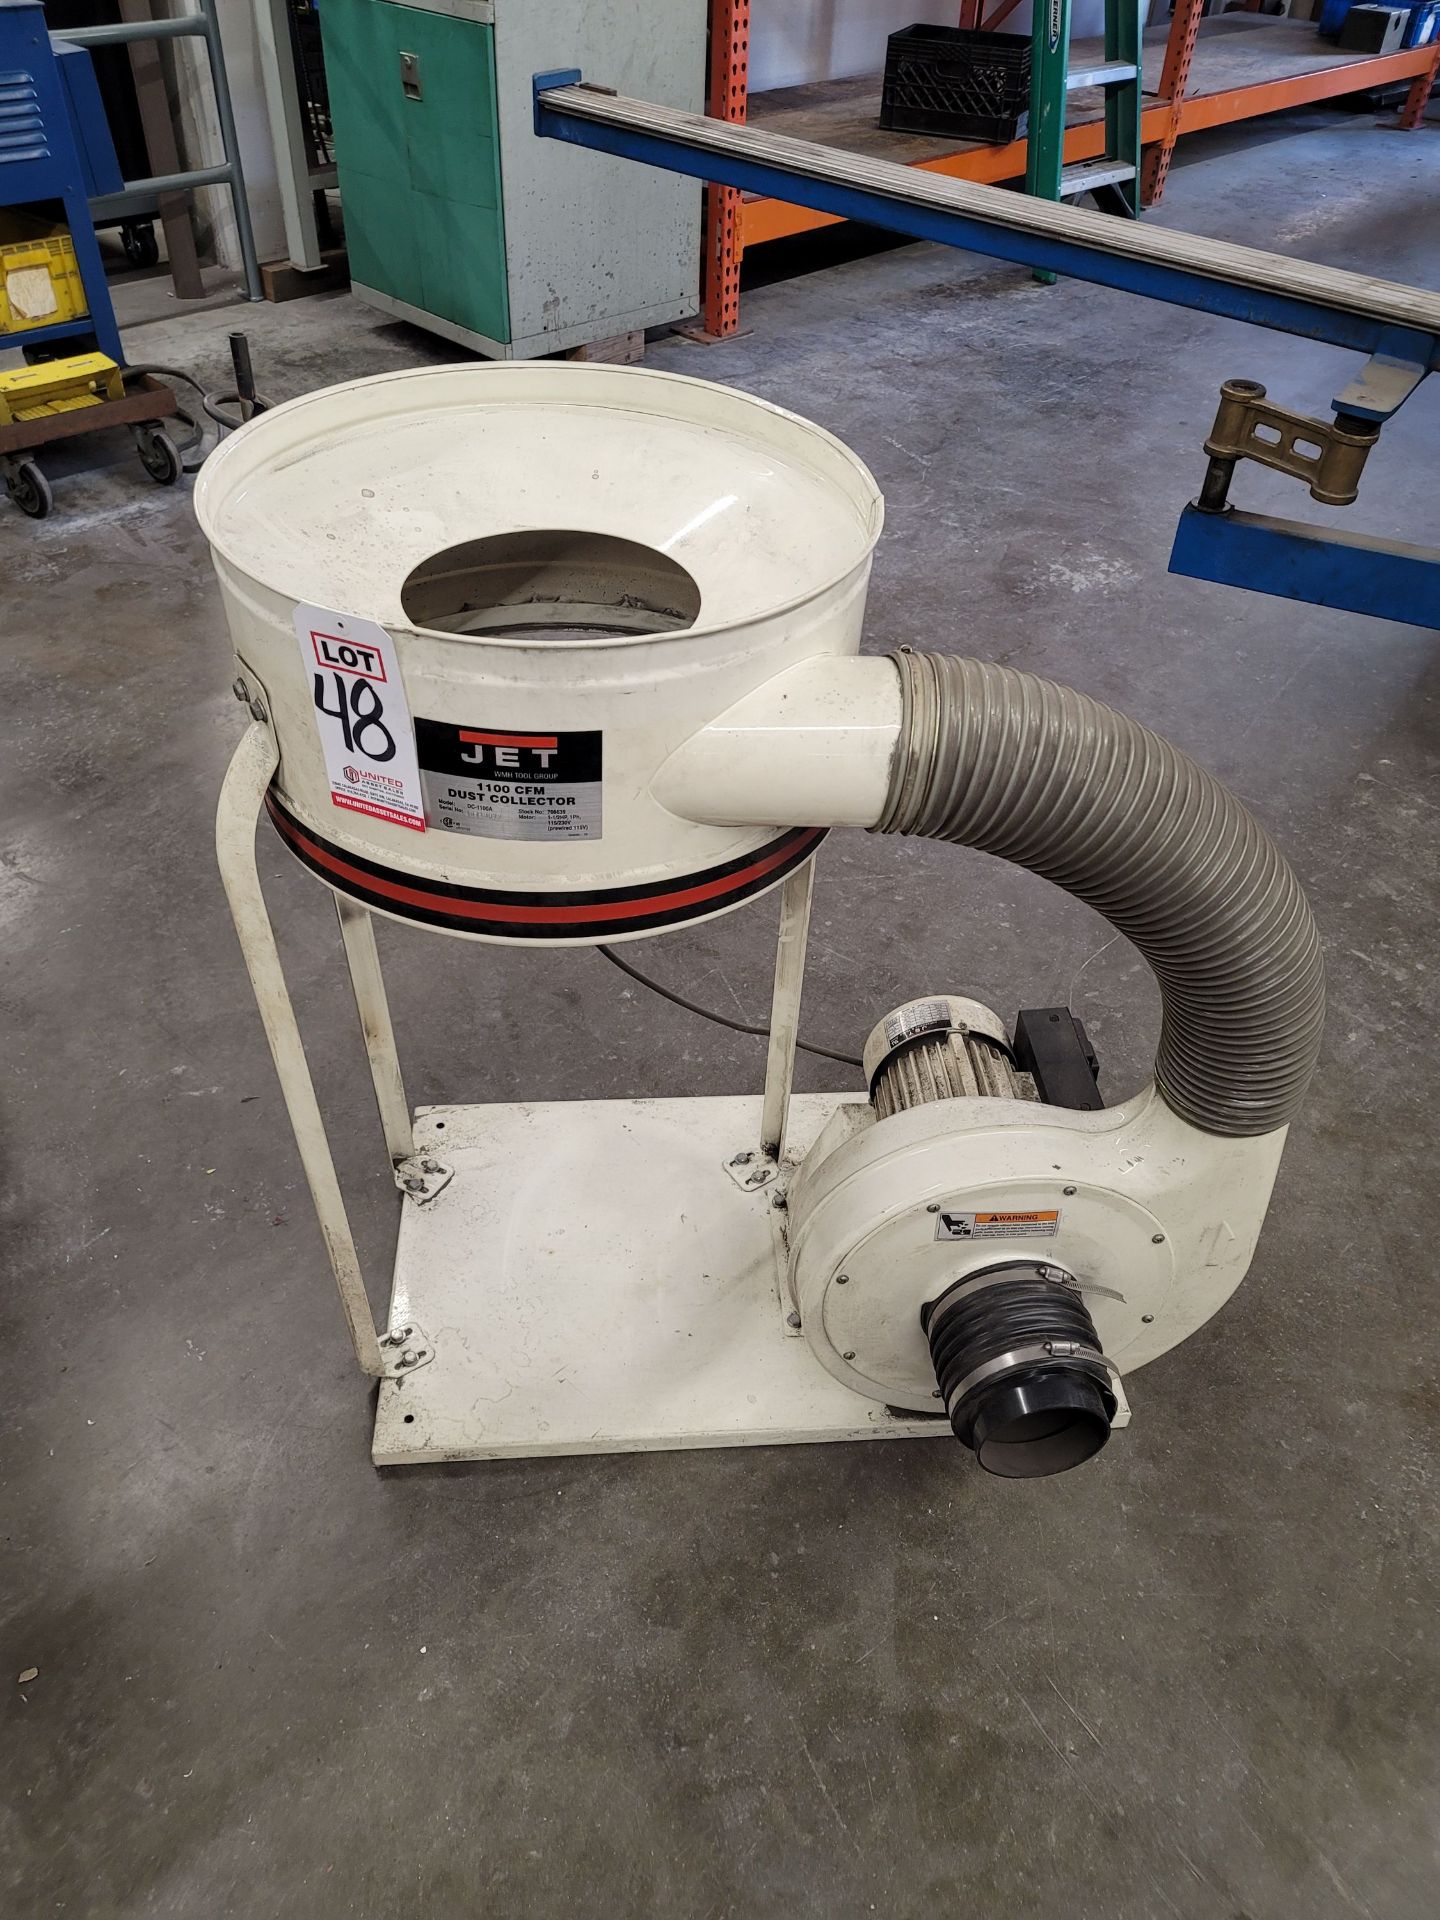 JET 1100 CFM DUST COLLECTOR, MODEL DC-1100A, 1-1/2 HP, SINGLE PHASE, S/N 40713873, MISSING THE